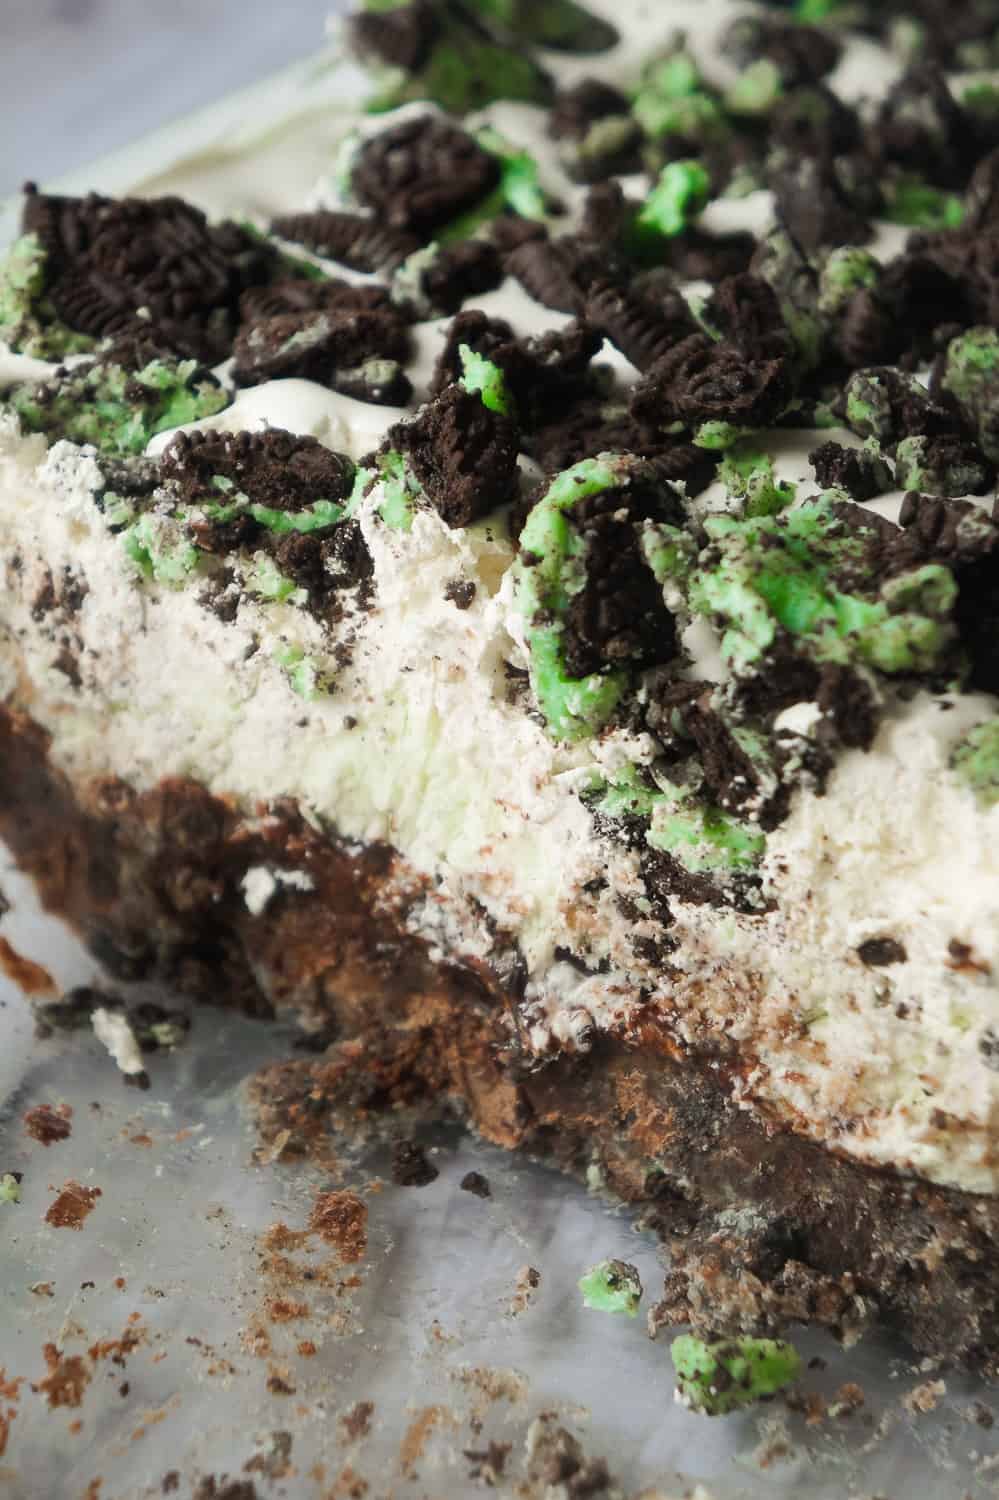 Mint Oreo Ice Cream Cake is an easy no bake dessert recipe perfect for summer. This mint chocolate chip ice cream cake is loaded with mint Oreo cookies, brownies, chocolate fudge sauce and Cool Whip.